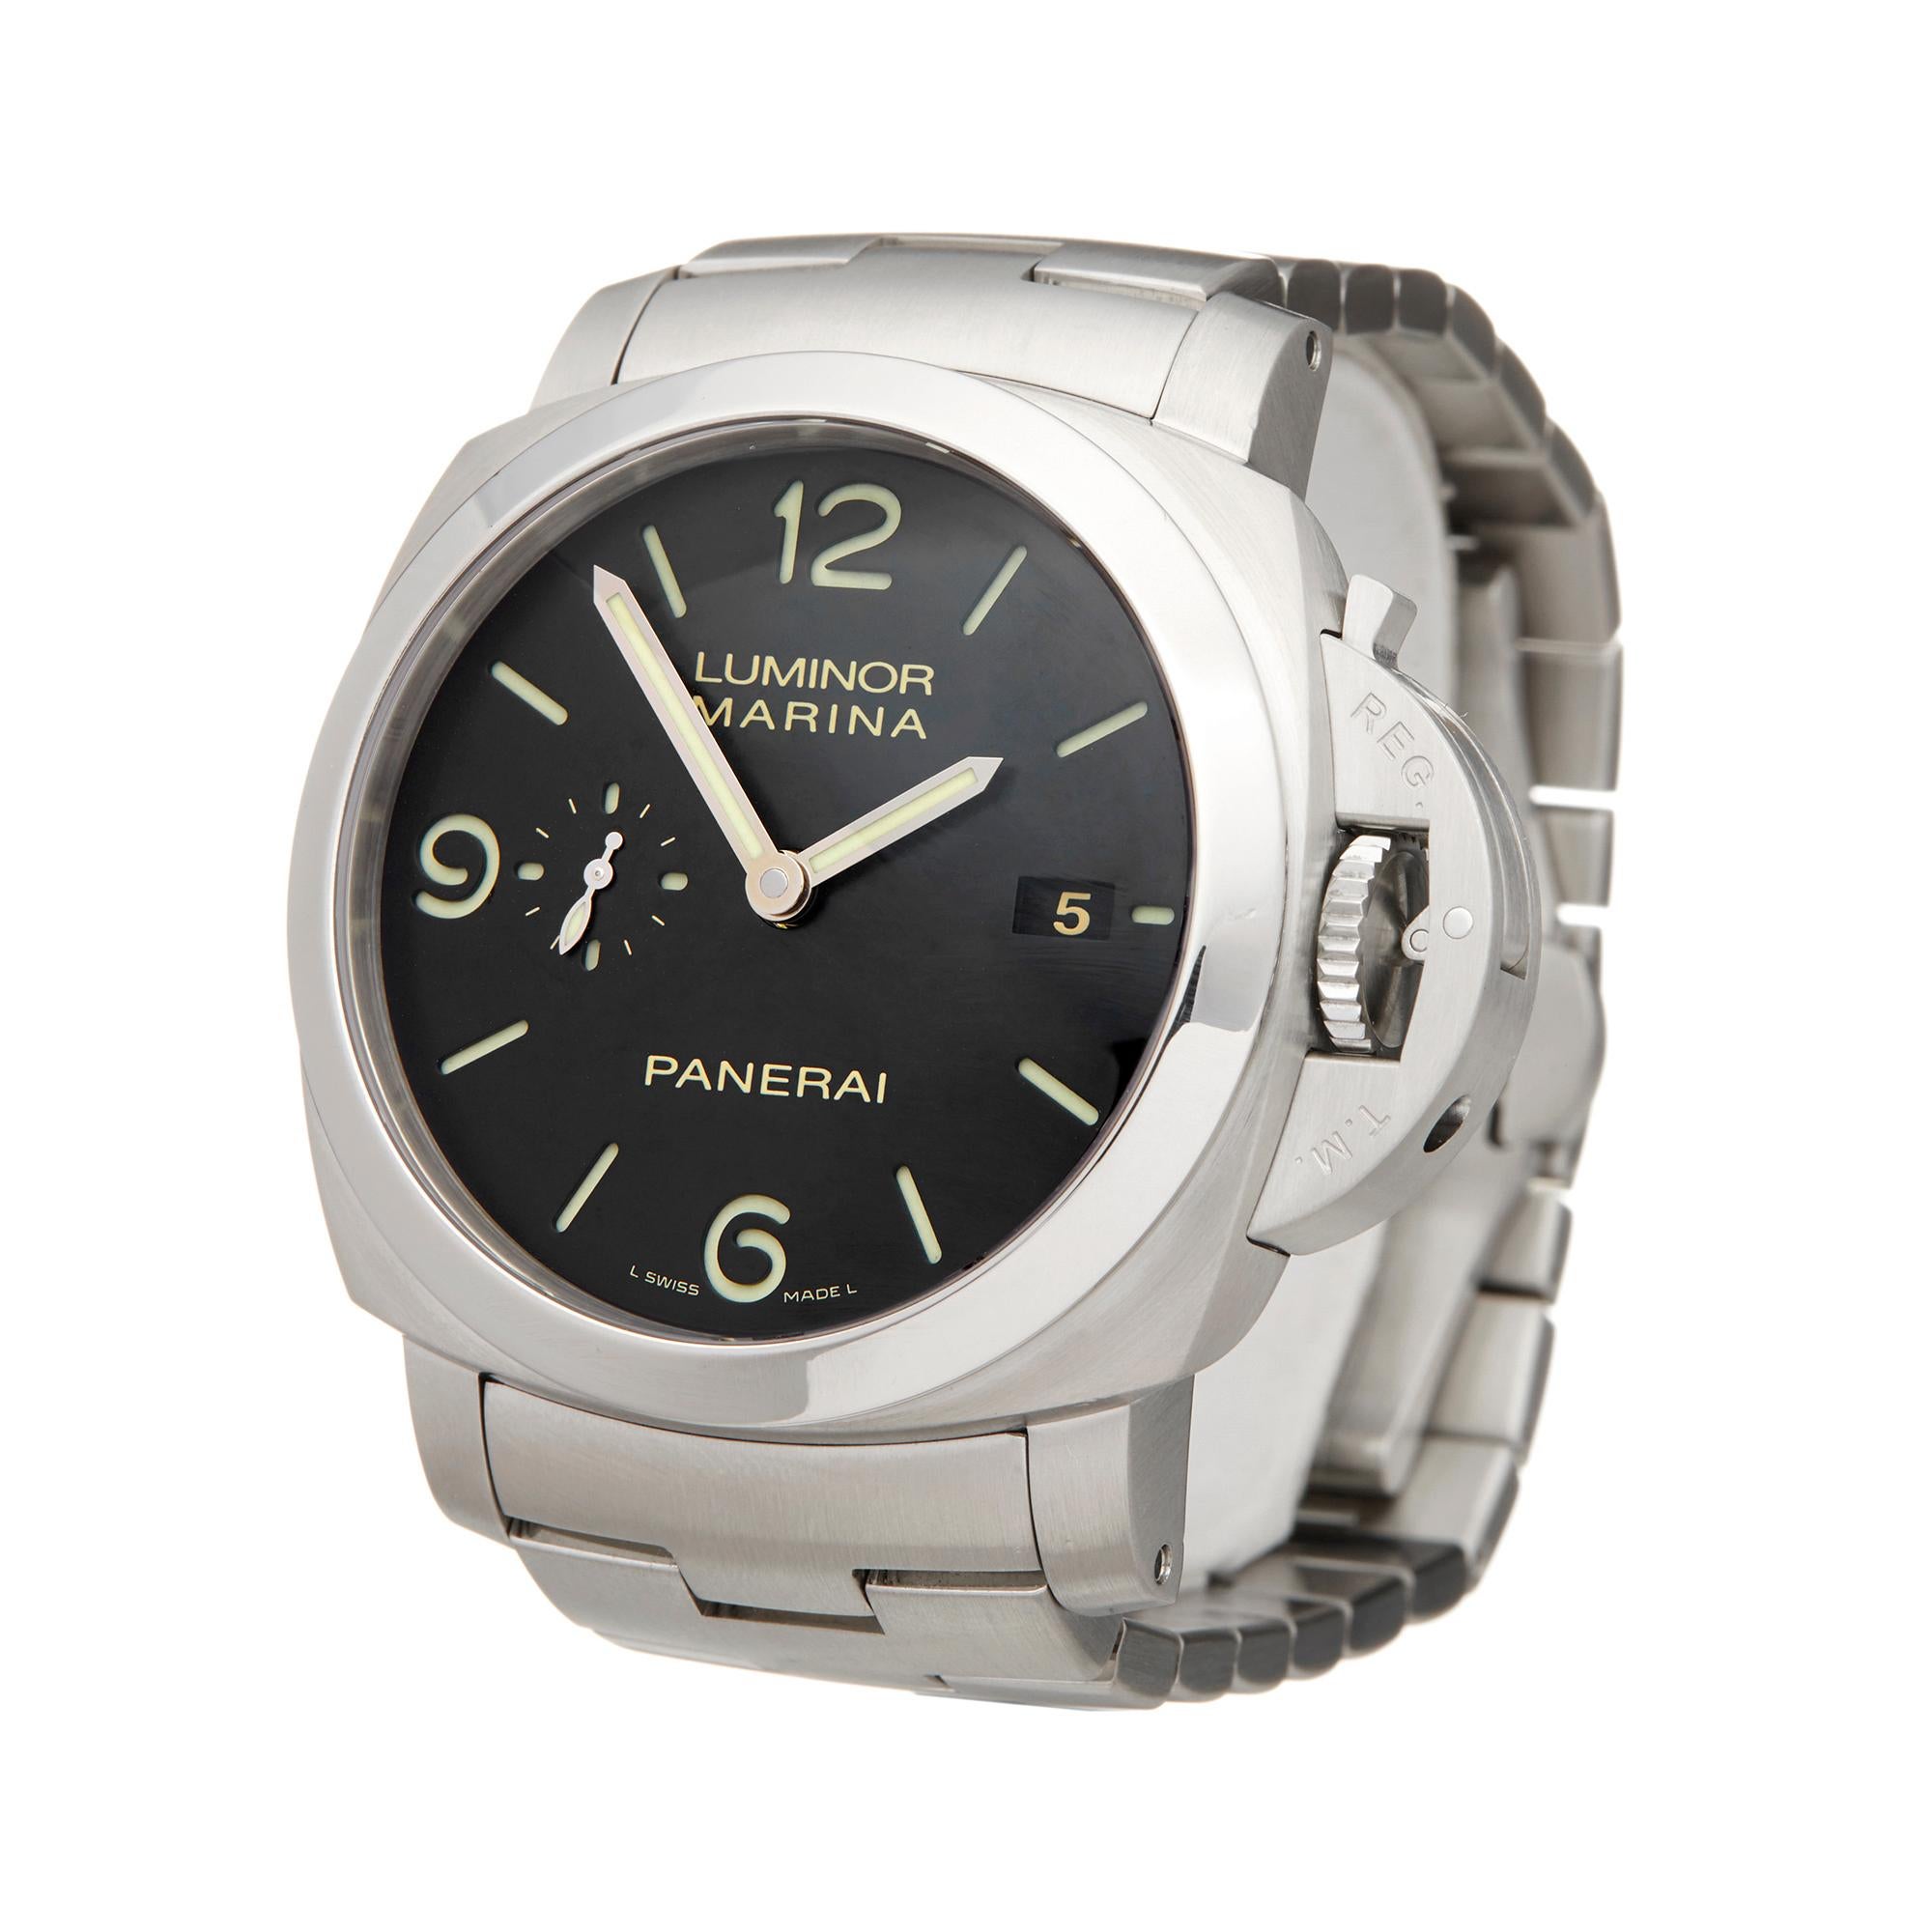 Ref: W6036
Manufacturer: Panerai
Model: Luminor
Model Ref: PAM00328
Age: 1st January 2015
Gender: Mens
Complete With: Box, Manuals, Guarantee, Service Papers & Tools 
Dial: Black Baton
Glass: Sapphire Crystal
Movement: Automatic
Water Resistance: To